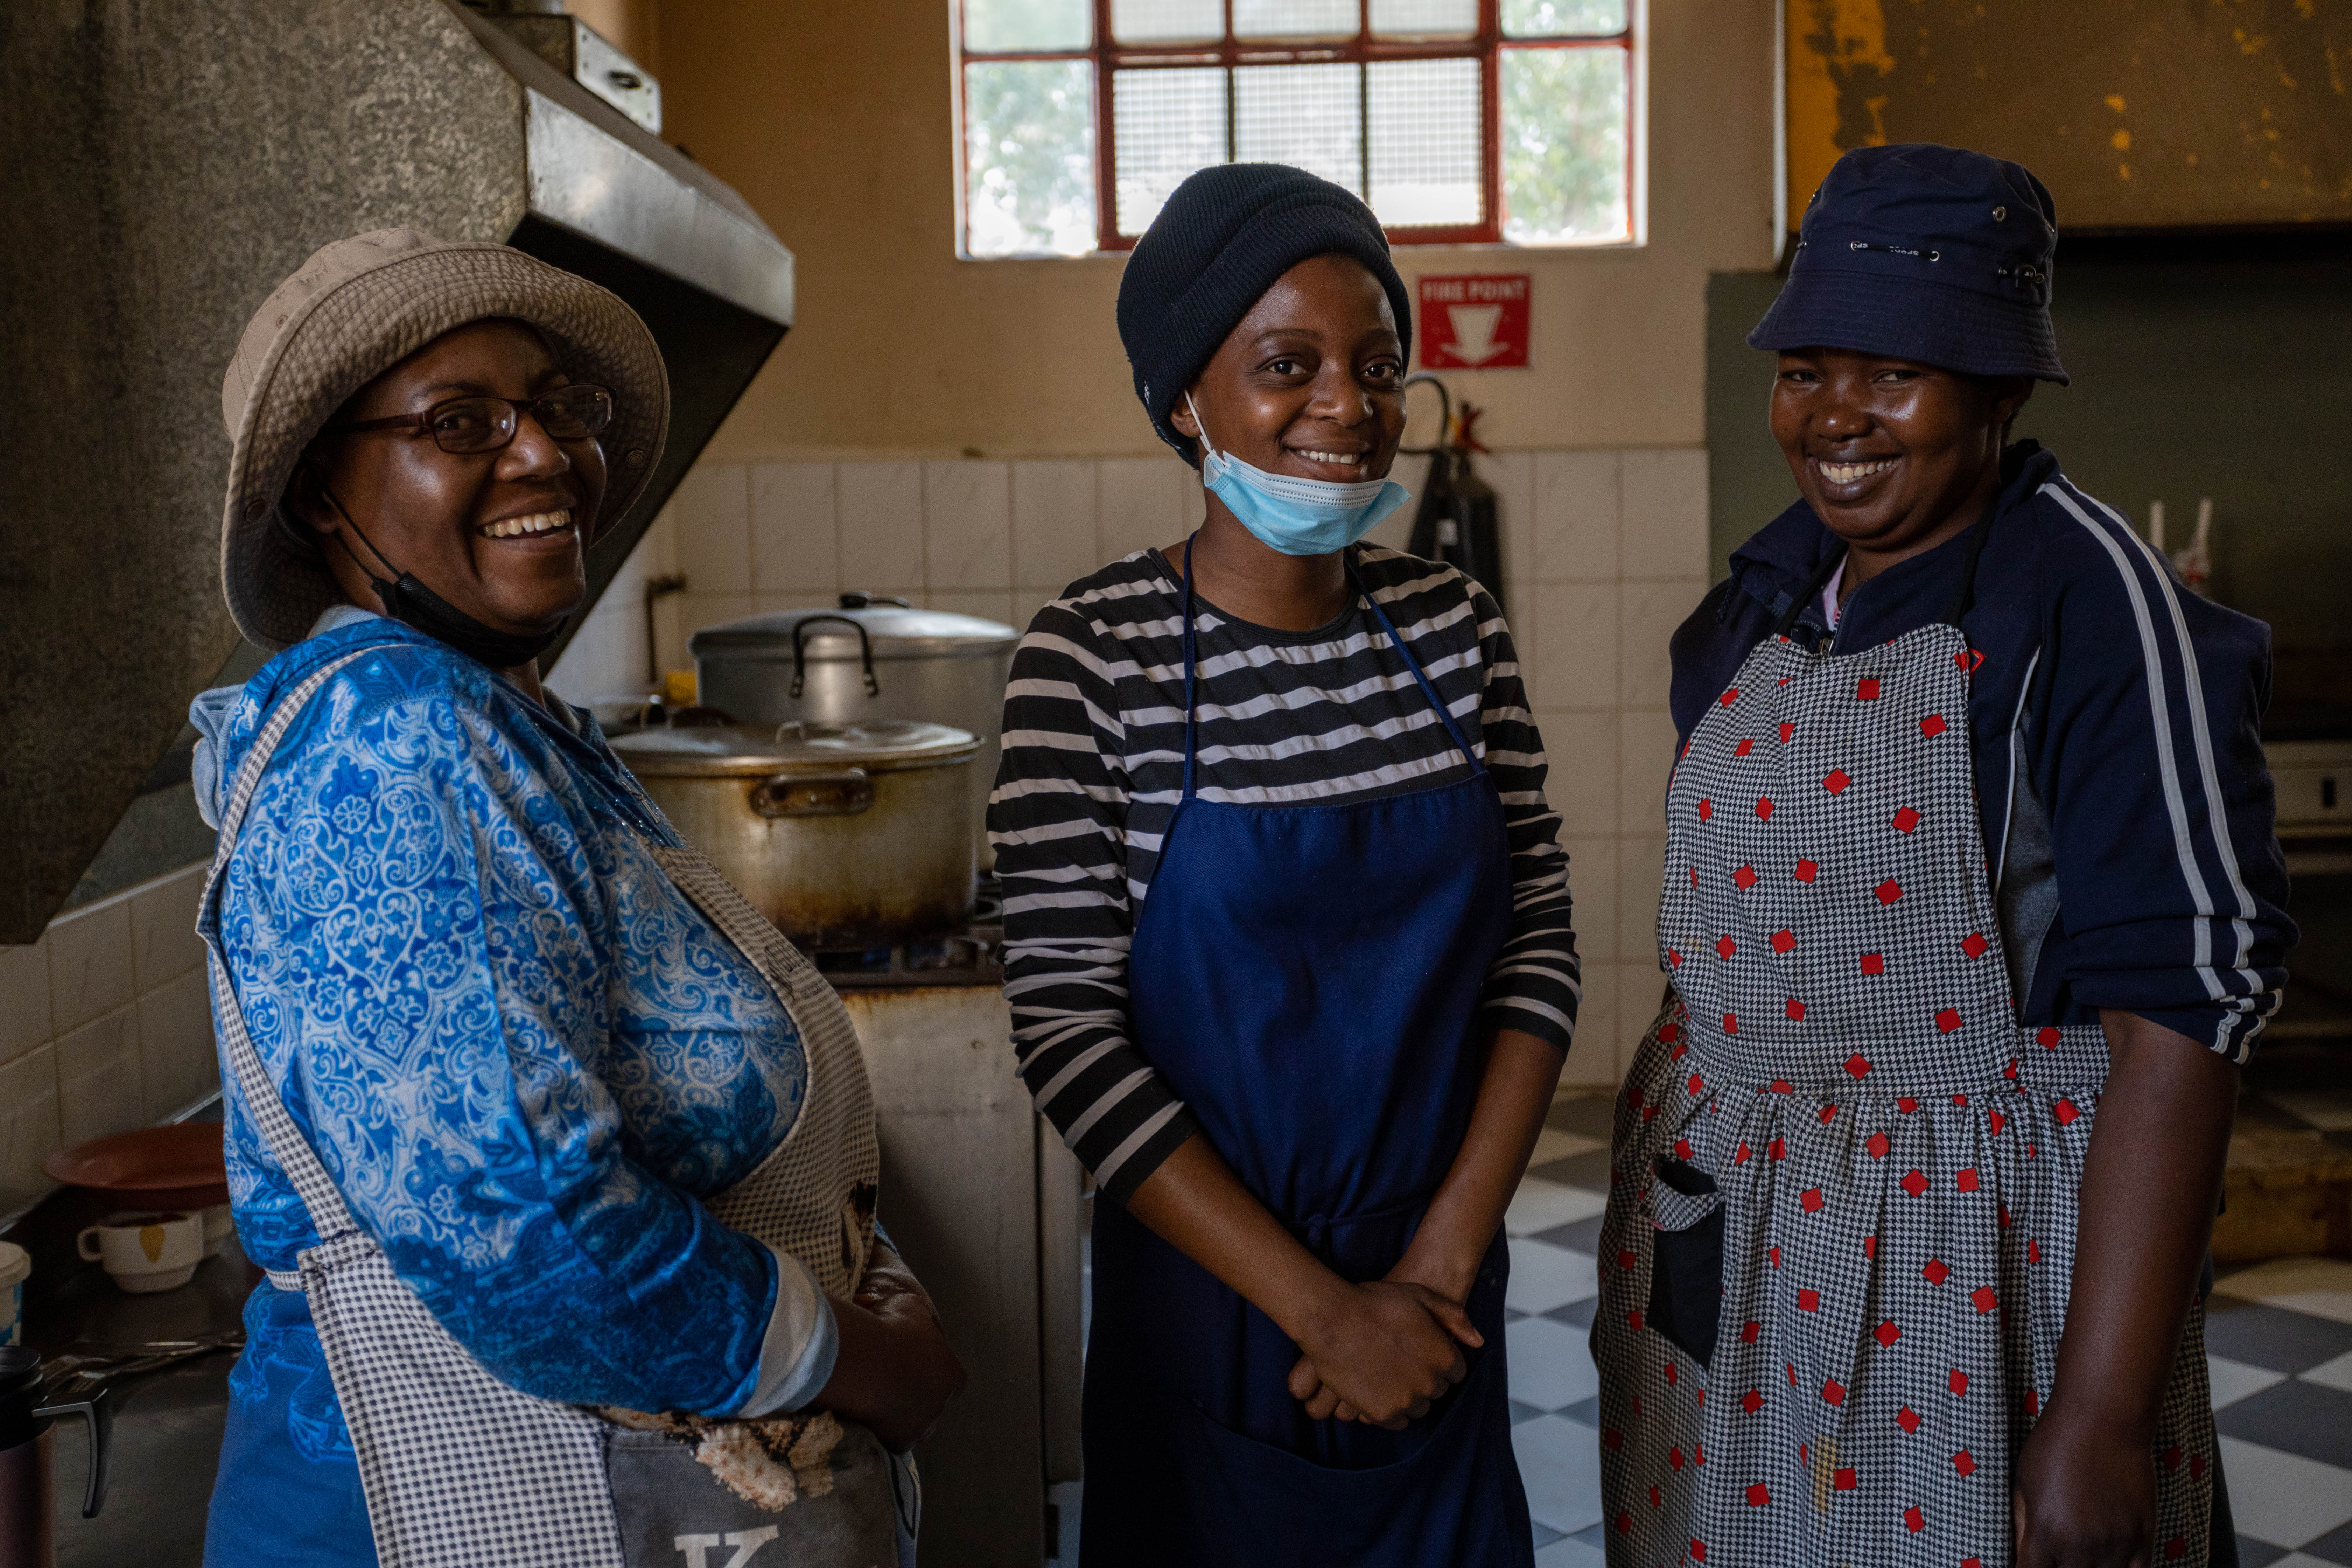 From left to right: Loreen Bafana, Samantha Saeau and Lumbai Mleya. These three help cook and serve meals for the people at the Sandra Jones Centre in Zimbabwe.